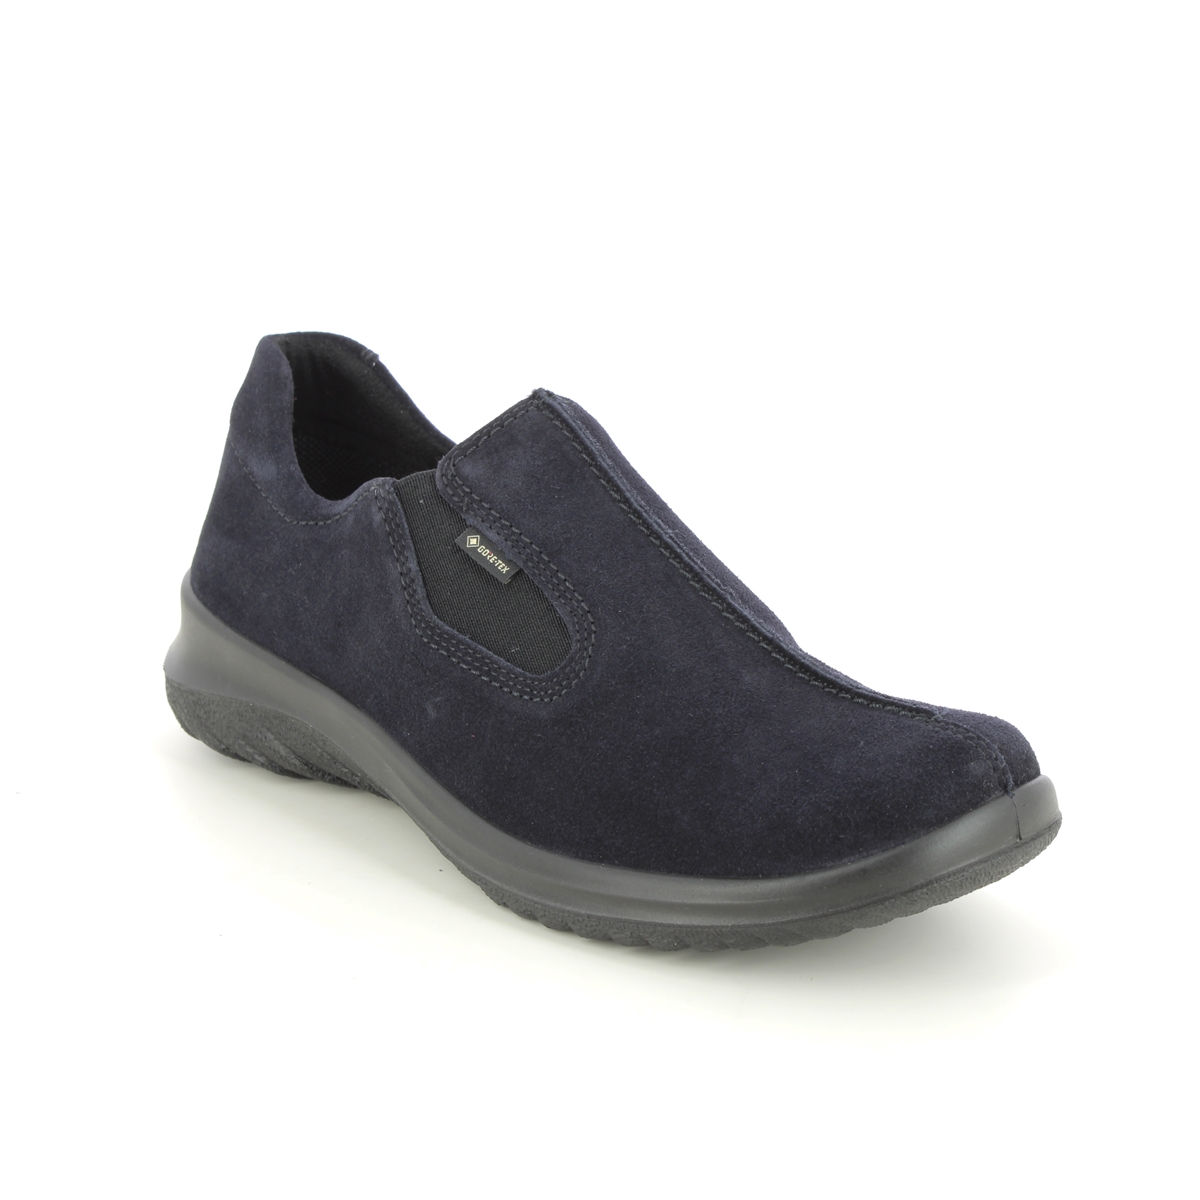 Legero Soft Shoe Gtx Navy Suede Womens Comfort Slip On Shoes 09568-80 In Size 5.5 In Plain Navy Suede